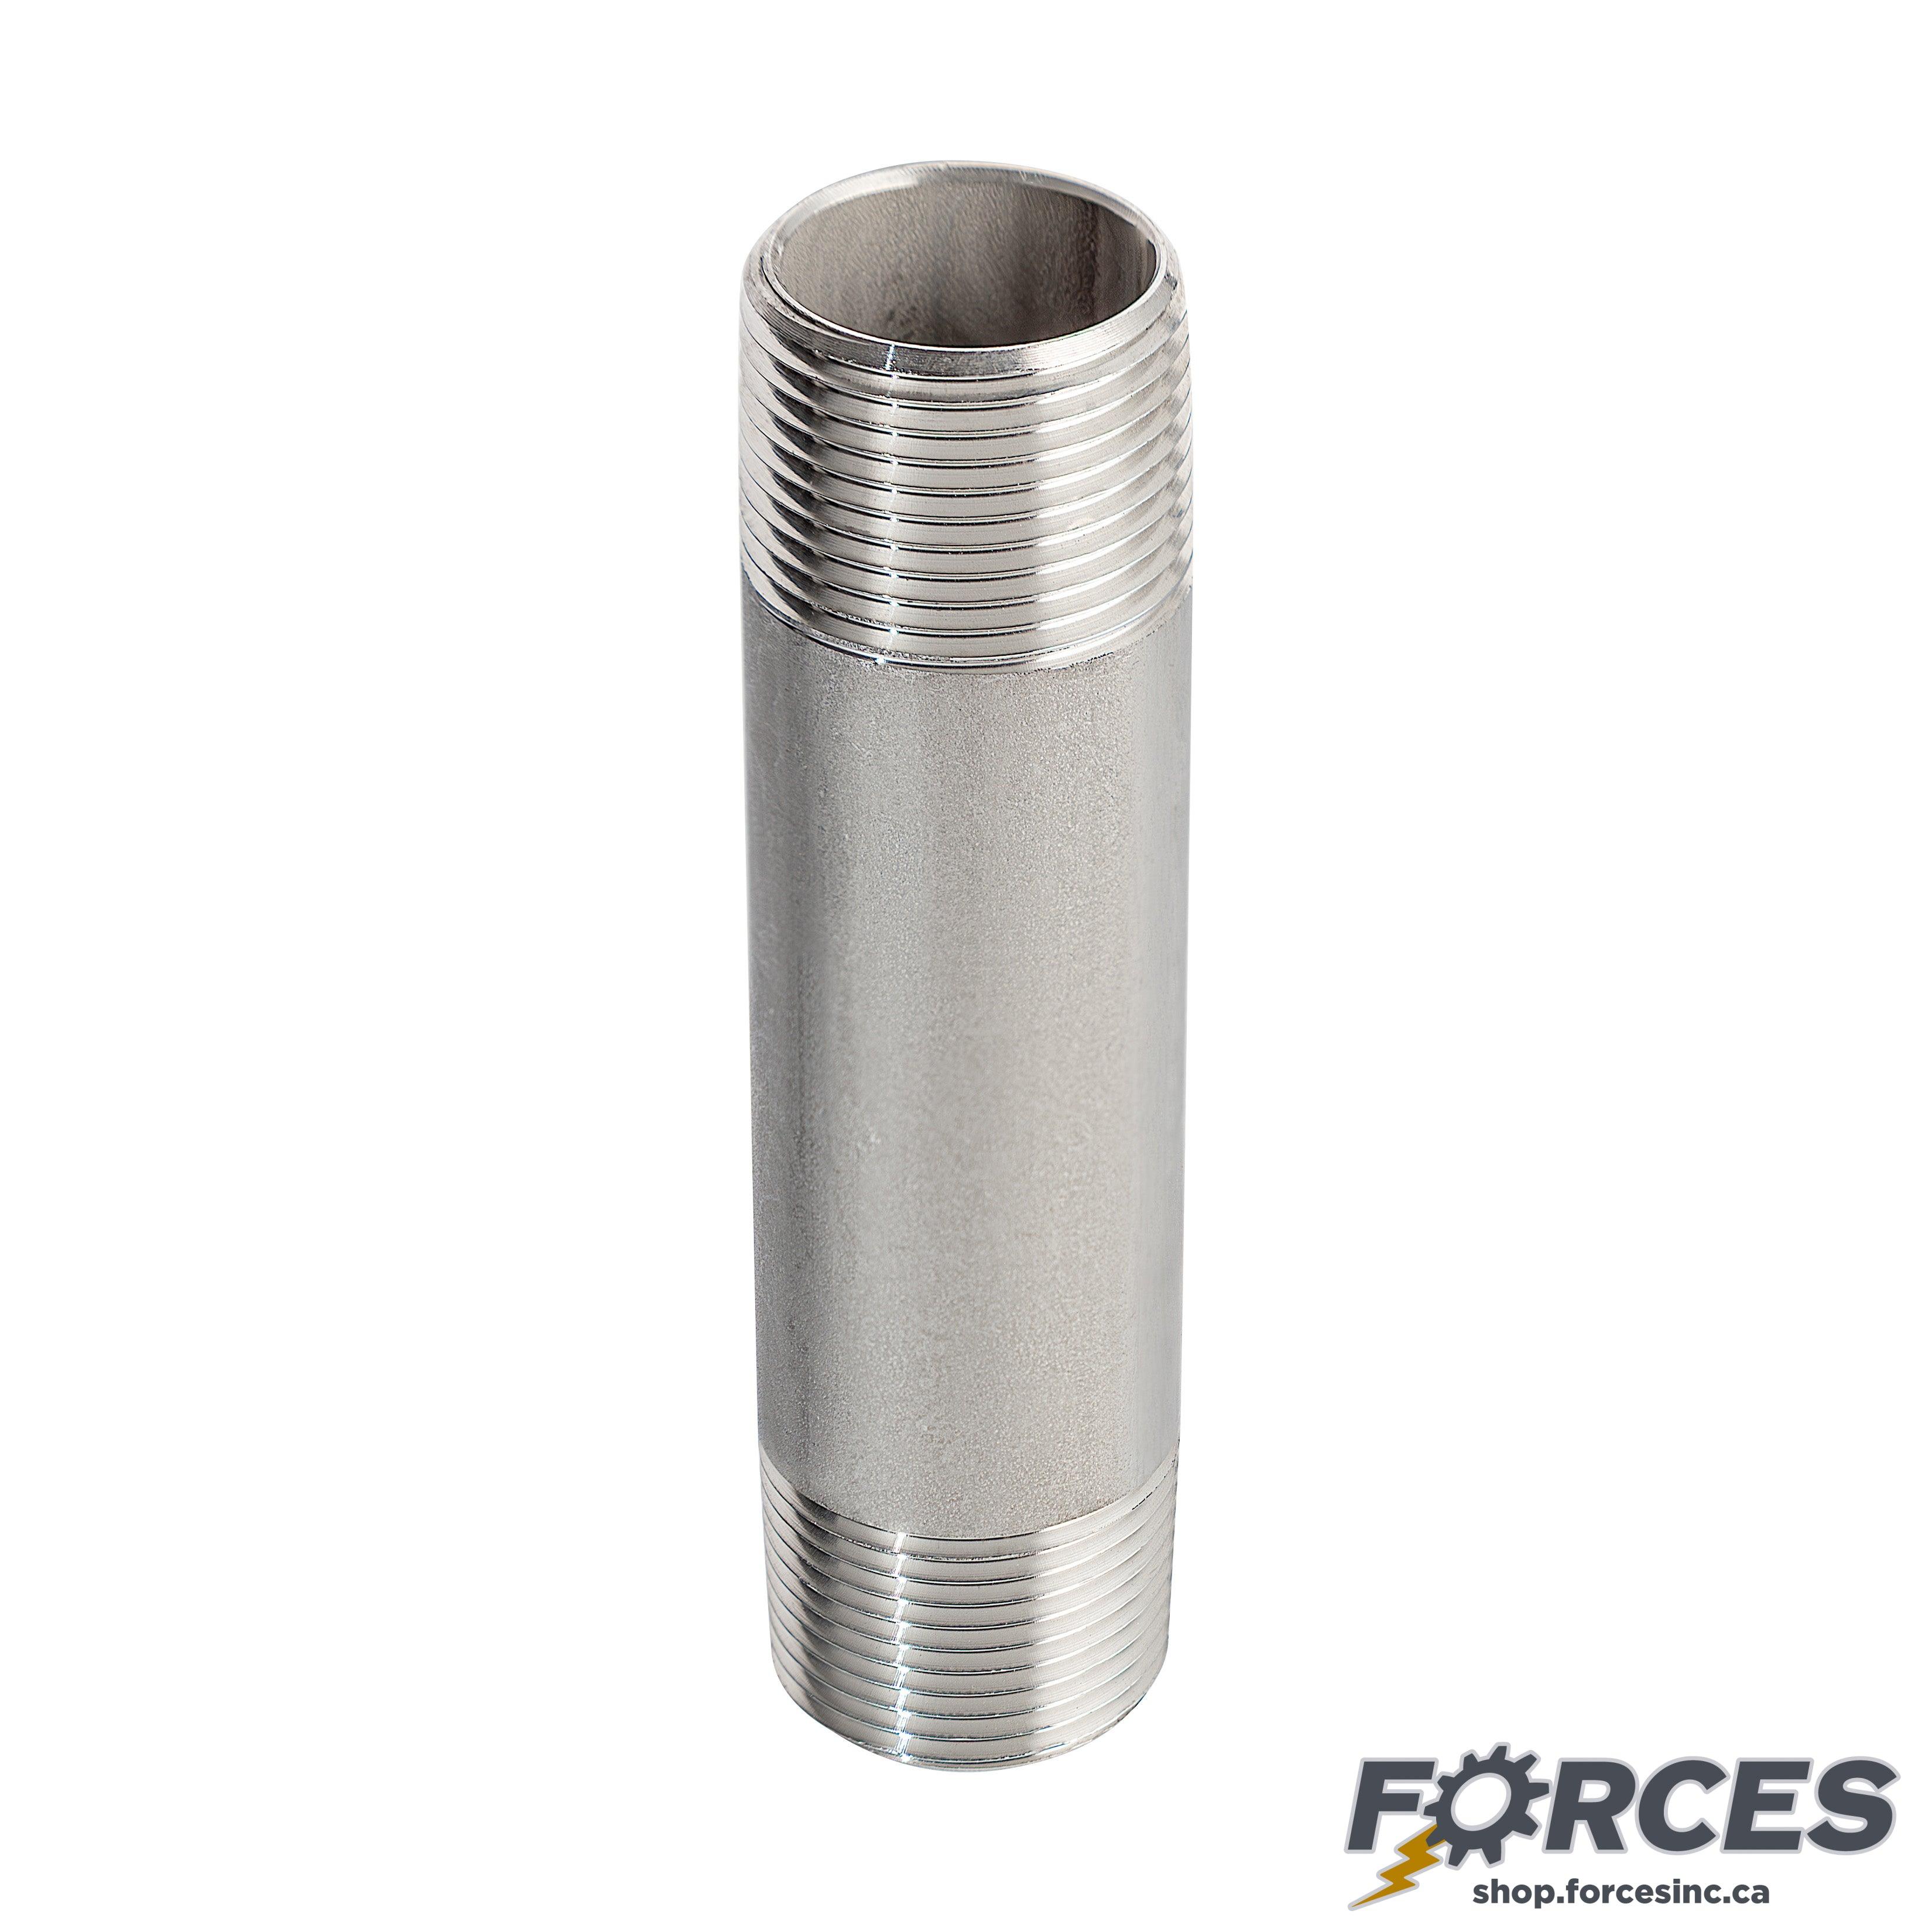 1-1/2" X 2" Long Nipple - Stainless Steel 316 - Forces Inc